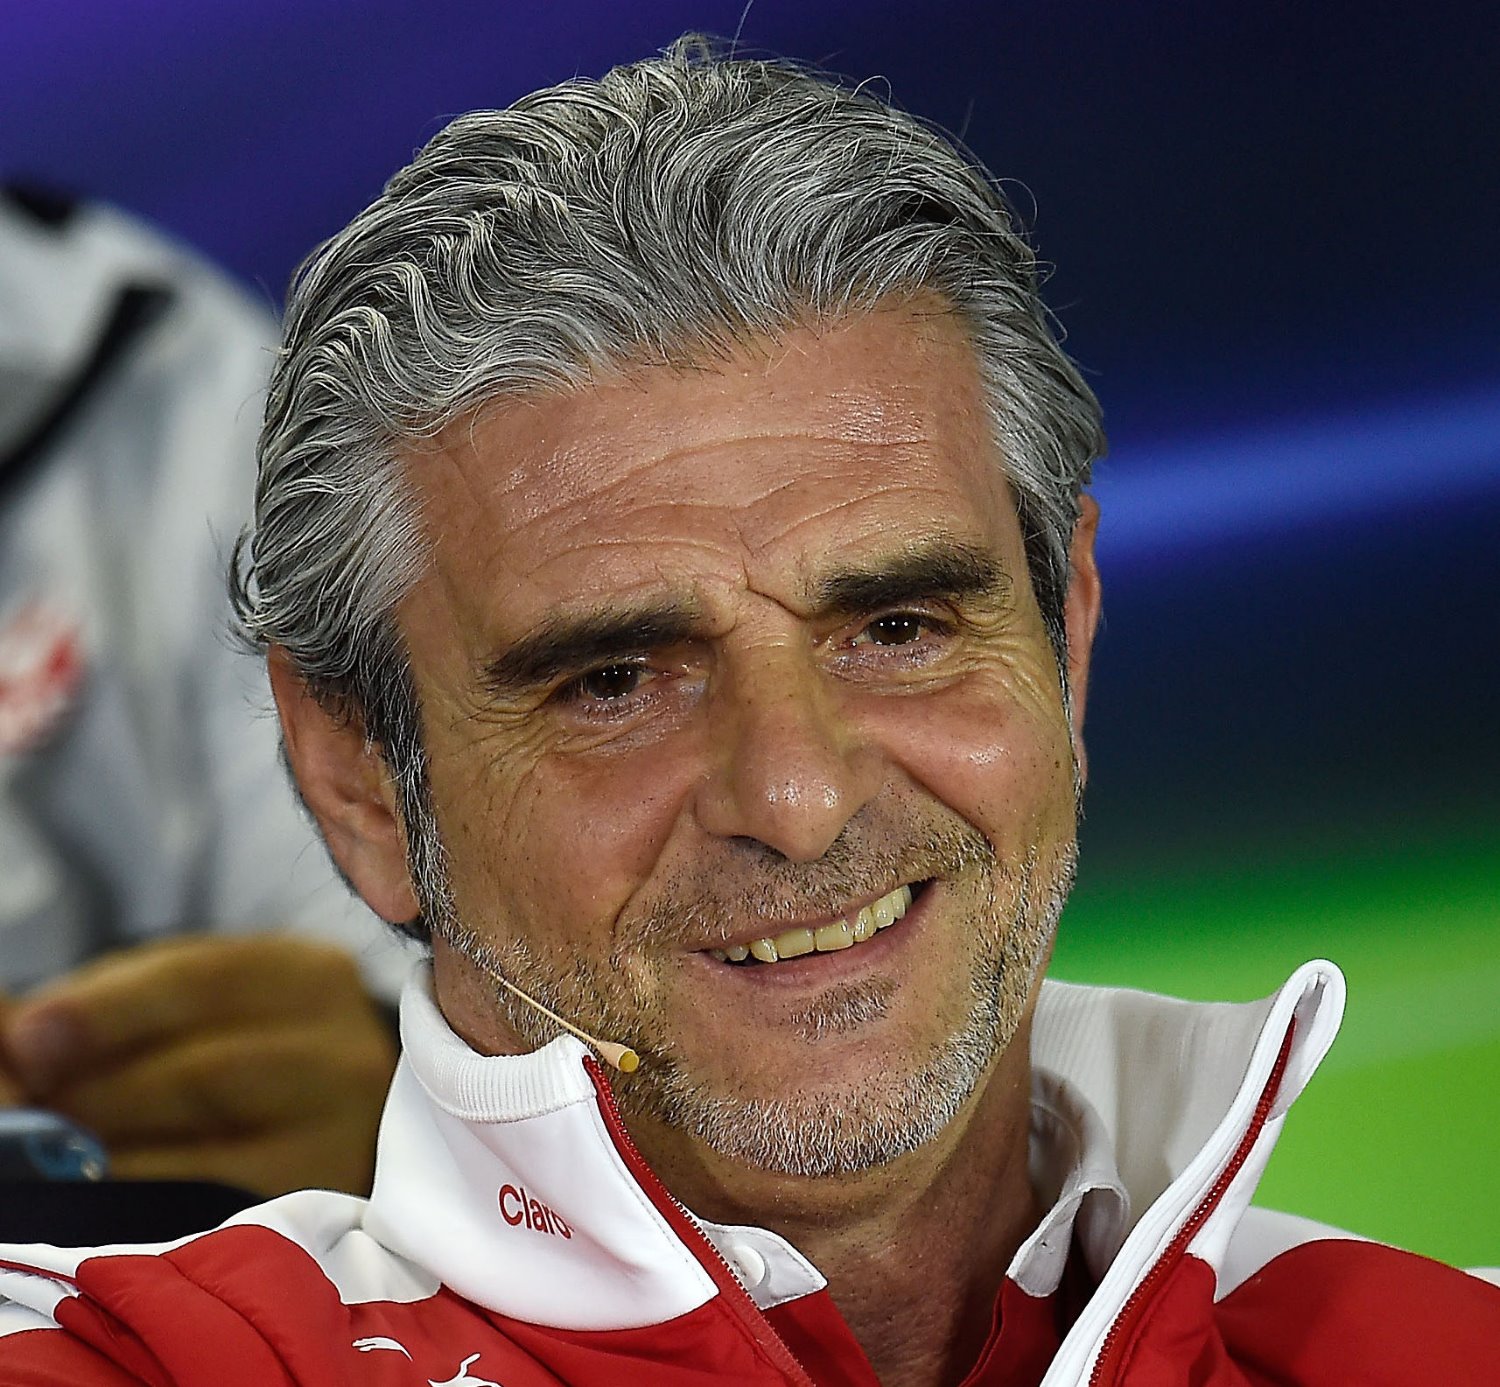 Arrivabene: Ferrari and Mercedes are not enemies, we are opponents